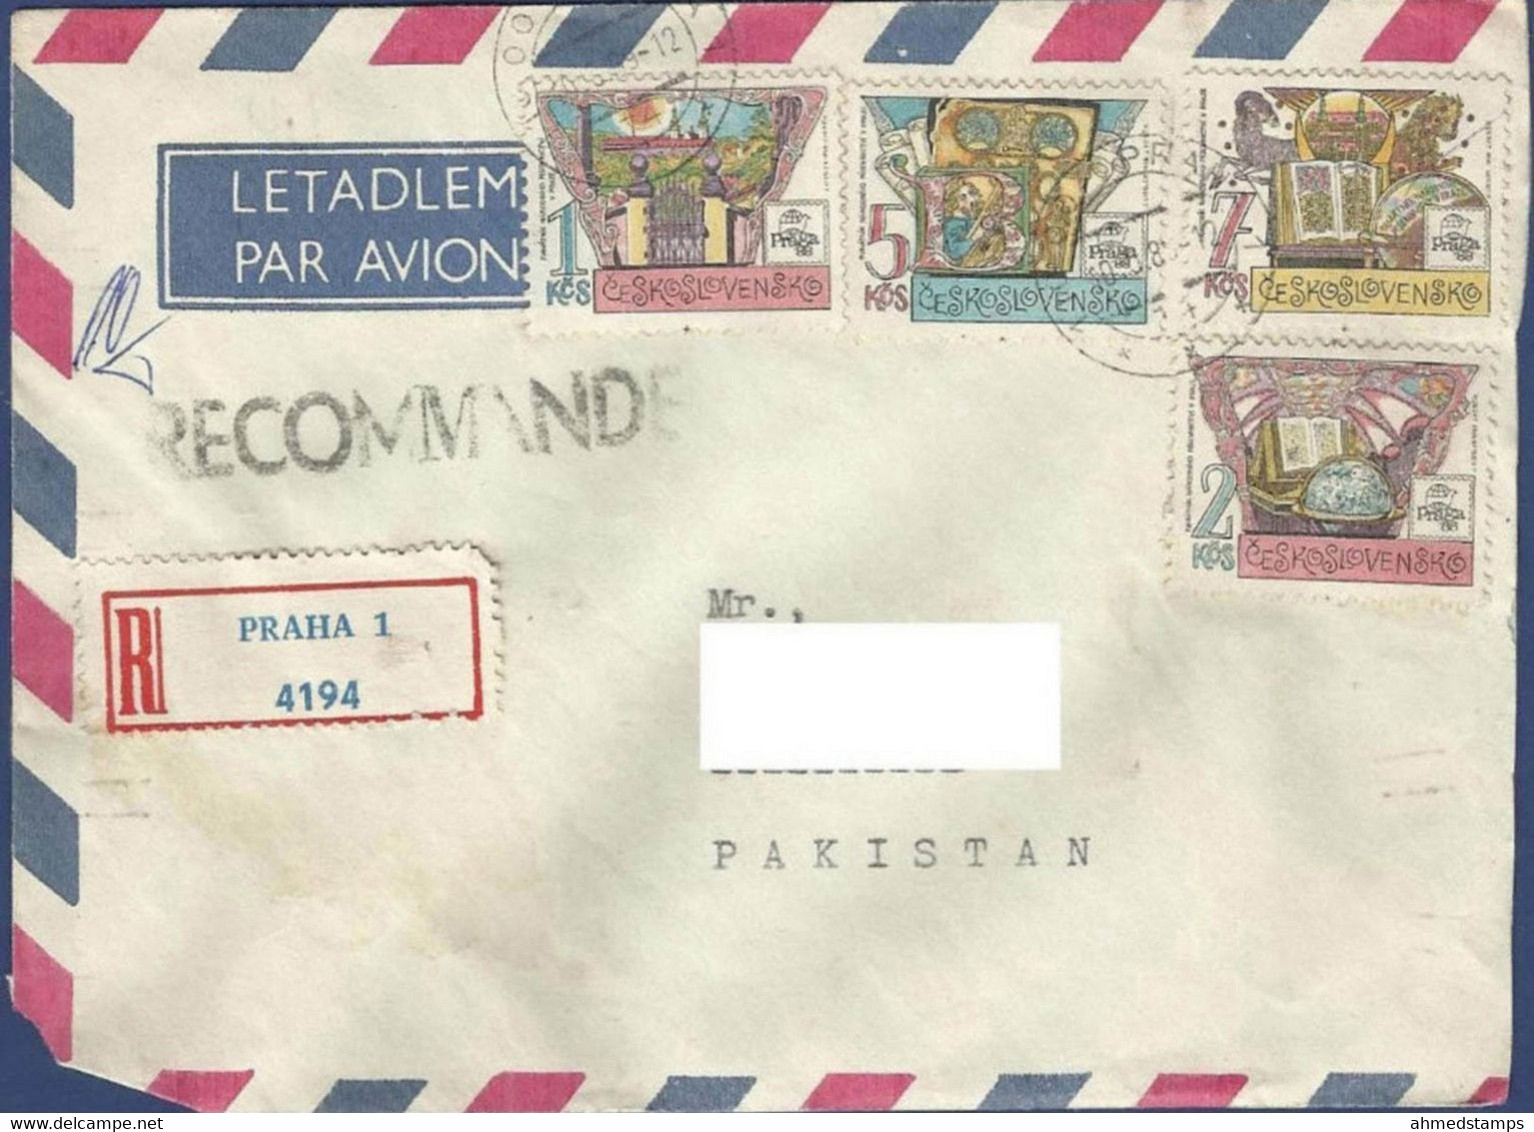 CZECHOSLOVAKIA REGISTERED POSTAL USED AIRMAIL COVER TO PAKISTAN - Luftpost